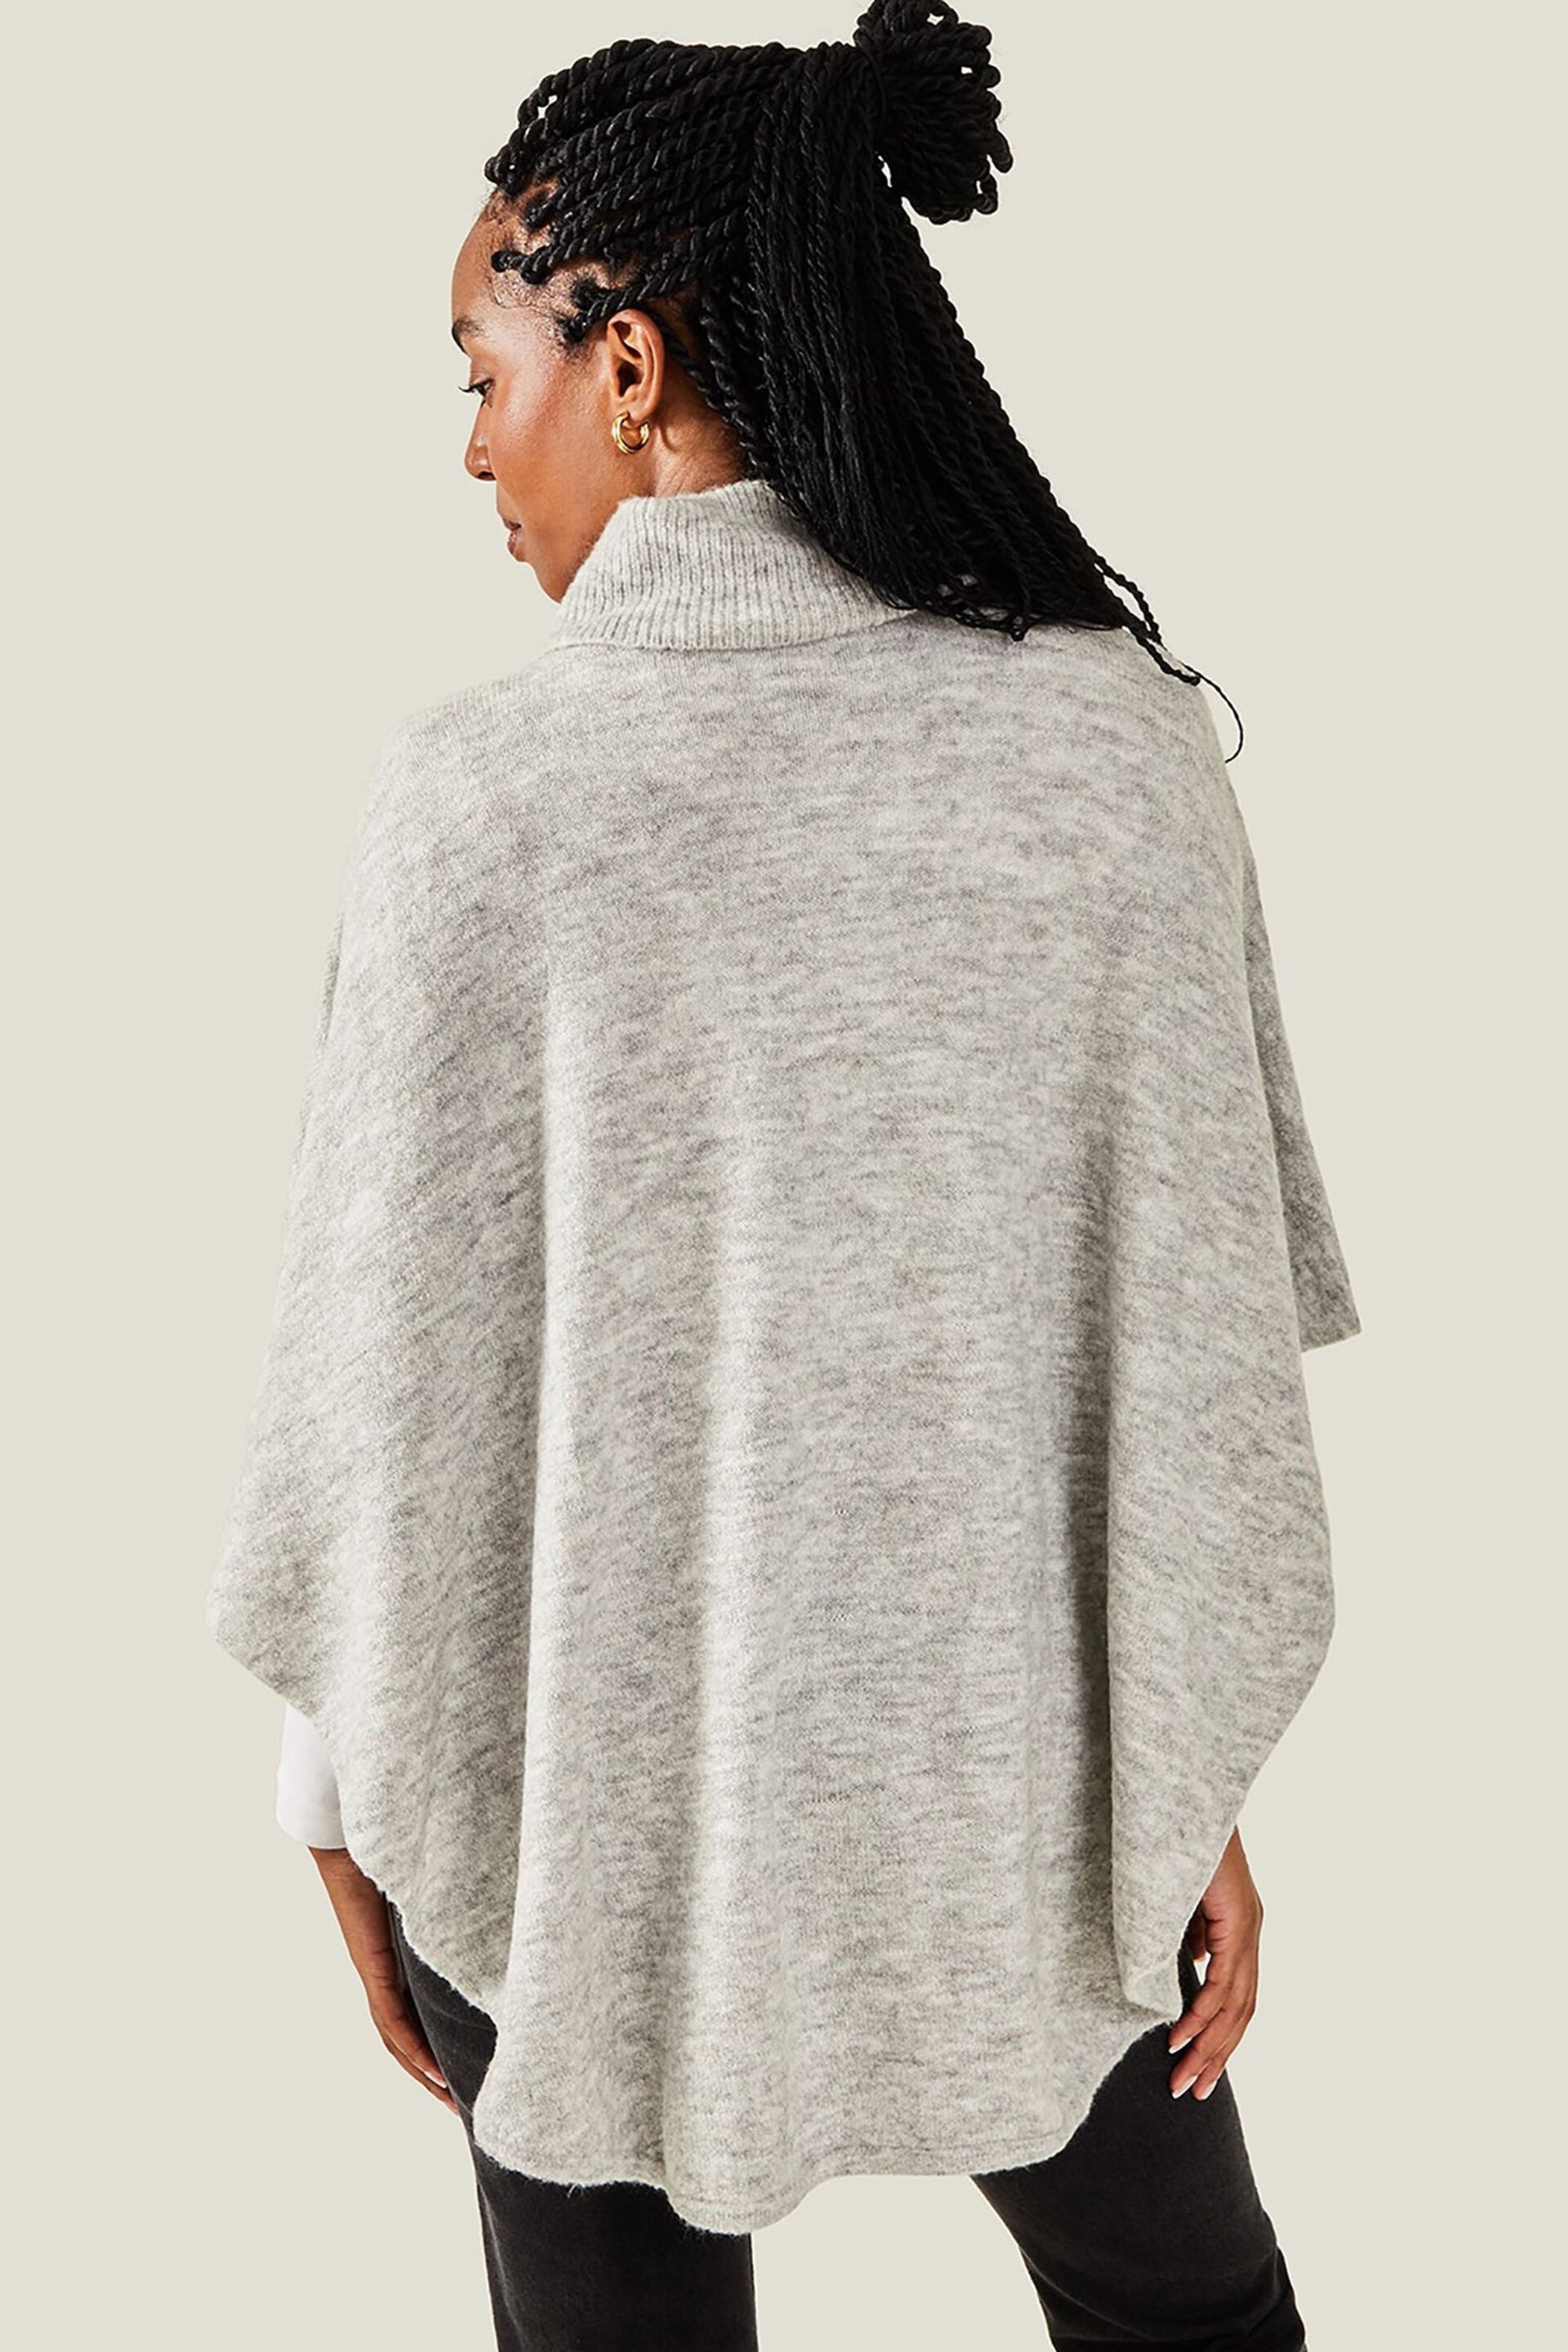 Accessorize Grey Cosy Knit Poncho - Image 2 of 4